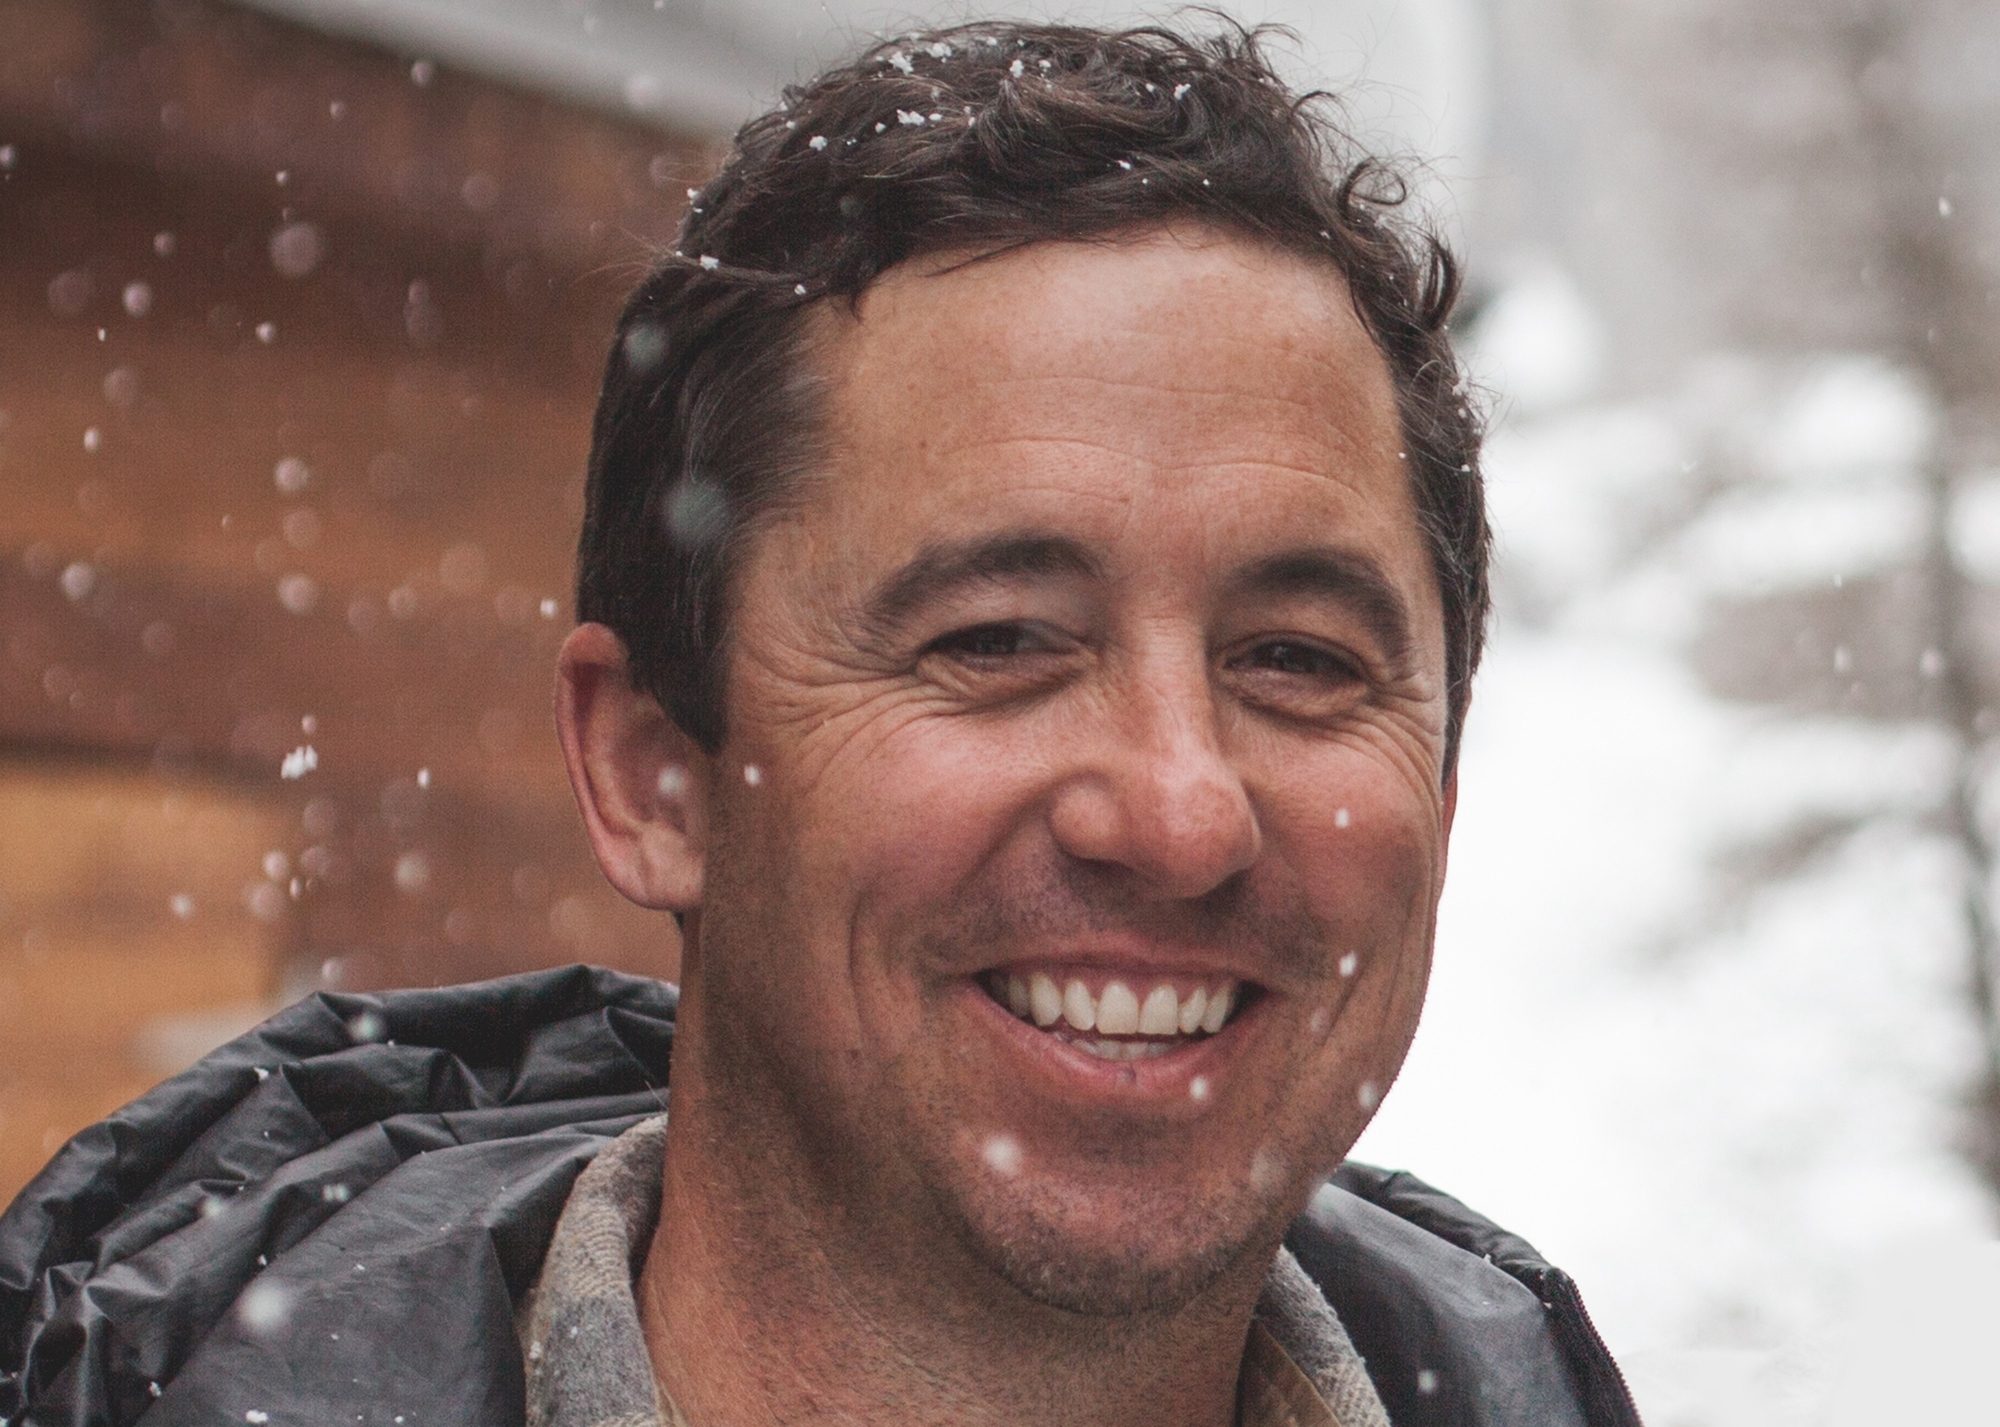 Porter Fox, the Amazon author profiled in this story, is smiling into the camera with falling snow in the background.